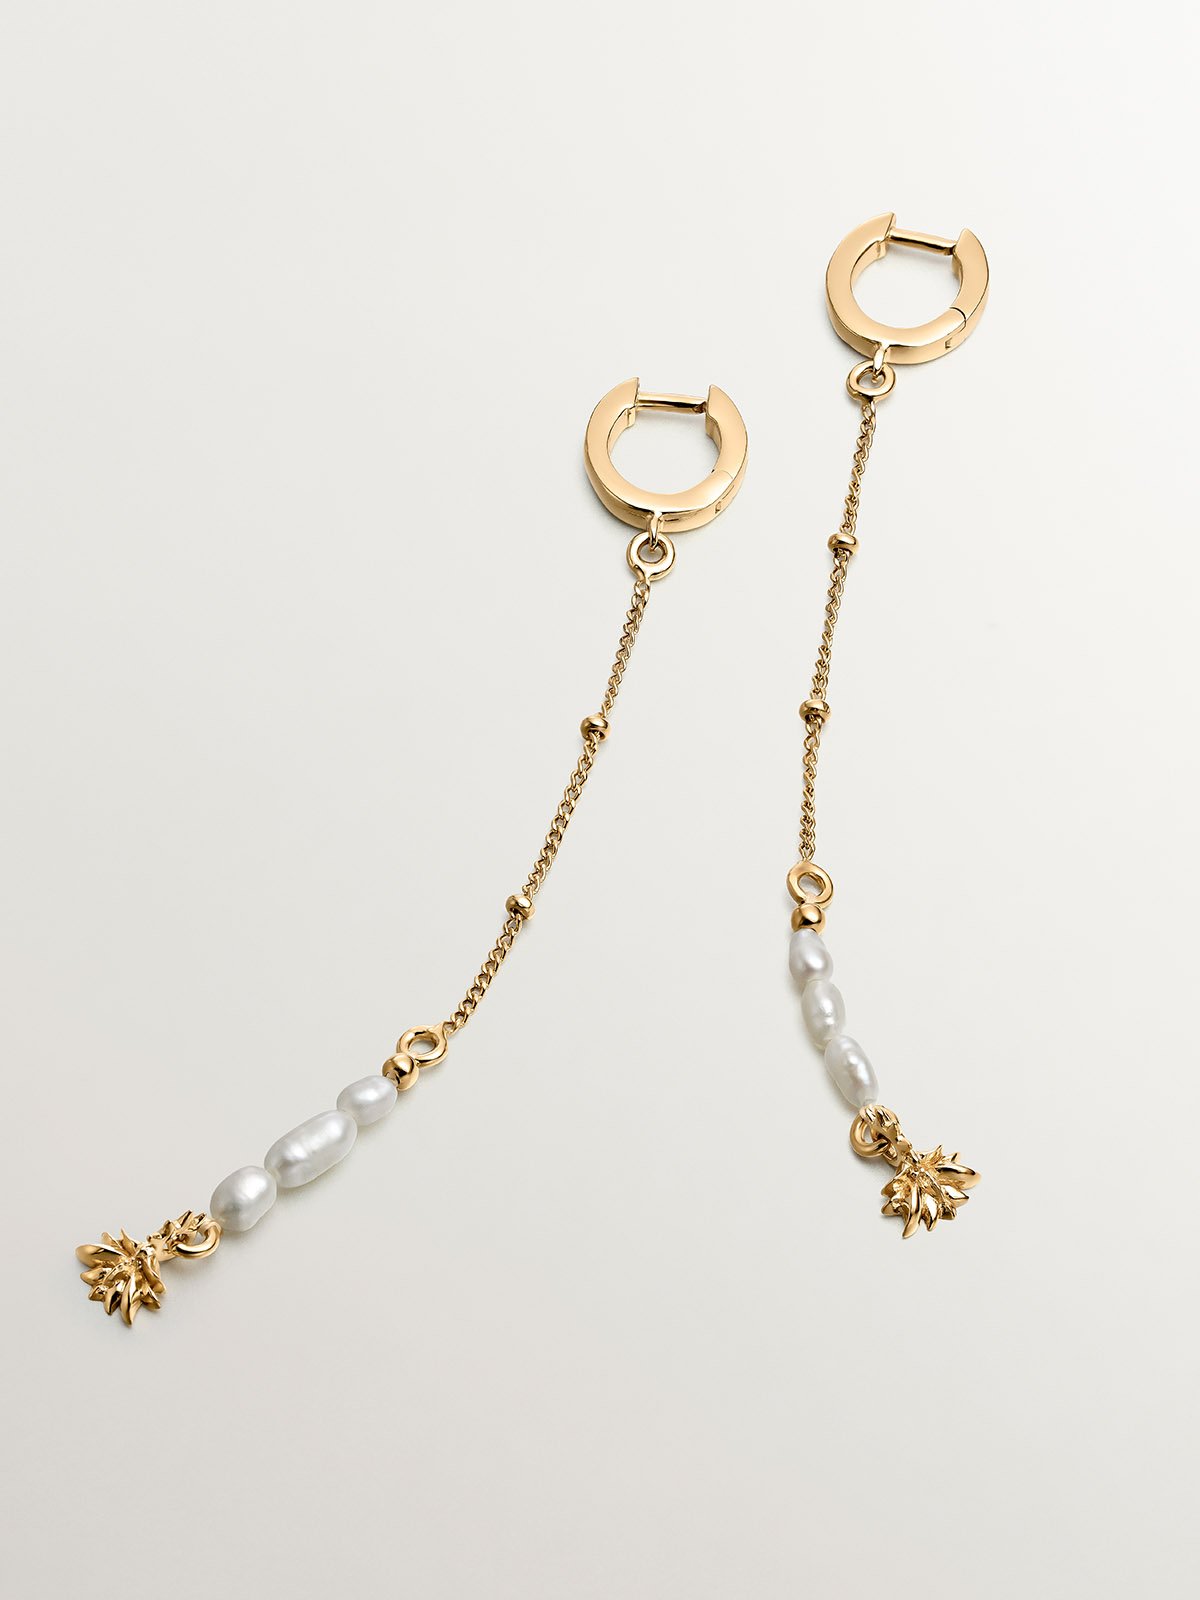 925 silver hoop earrings bathed in 18K yellow gold with pearl pendant and lotus flower.